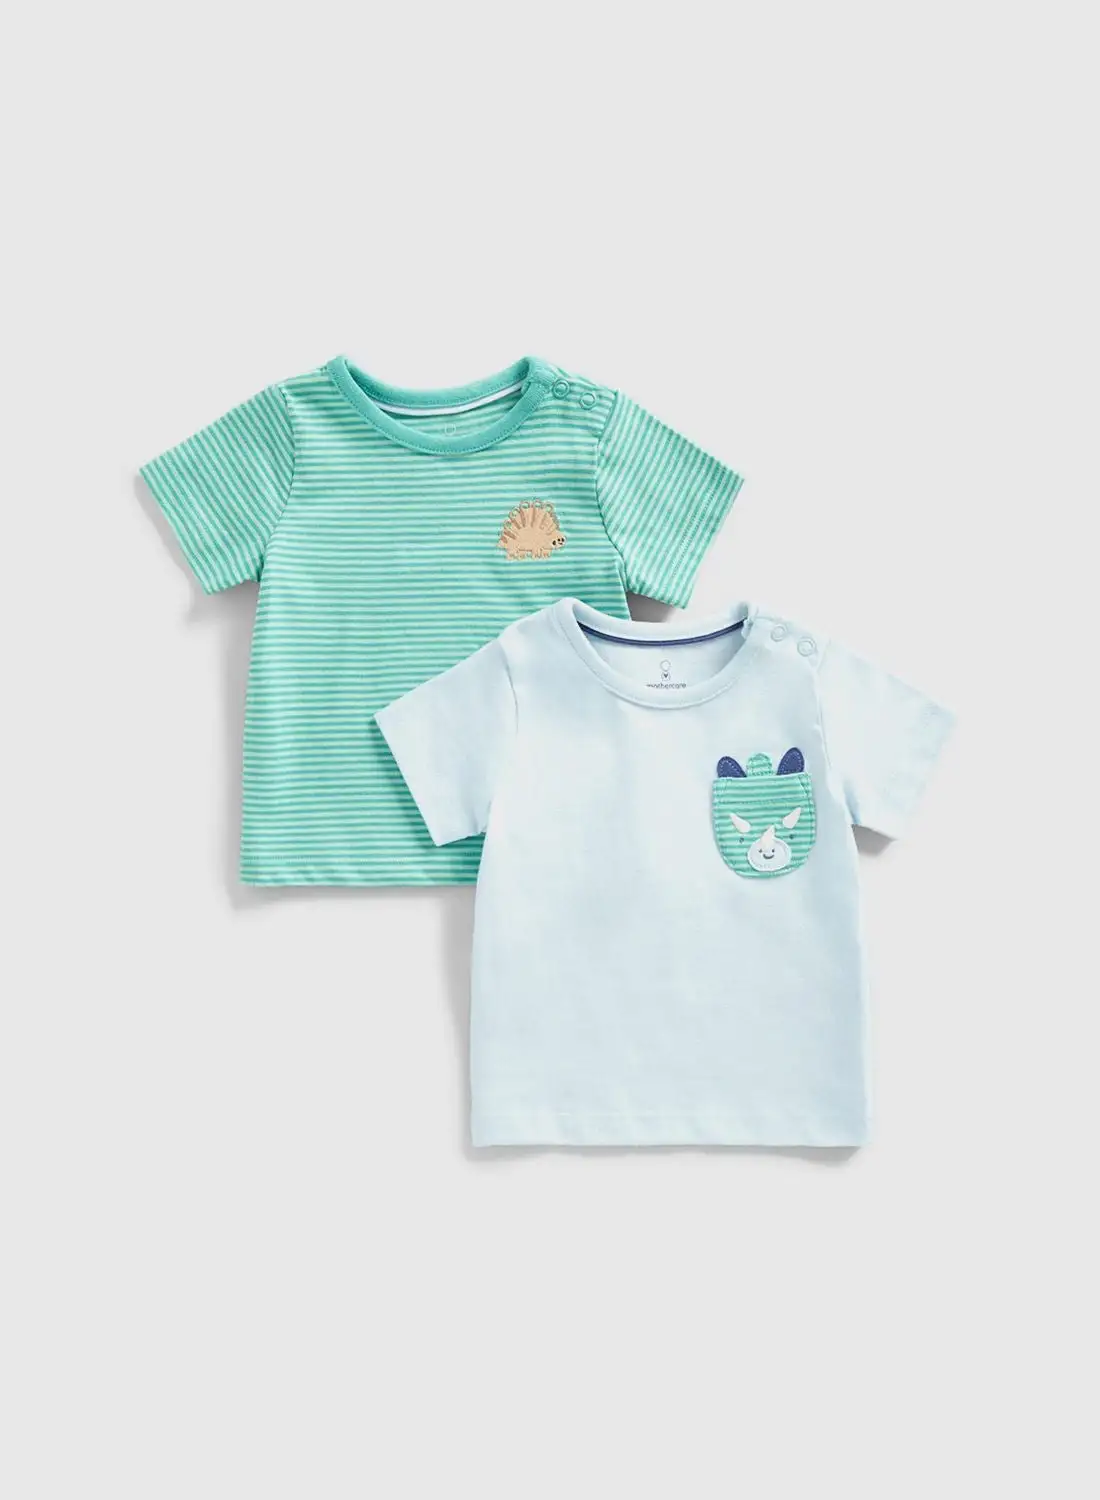 mothercare Kids 2 Pack Graphic T-Shirt